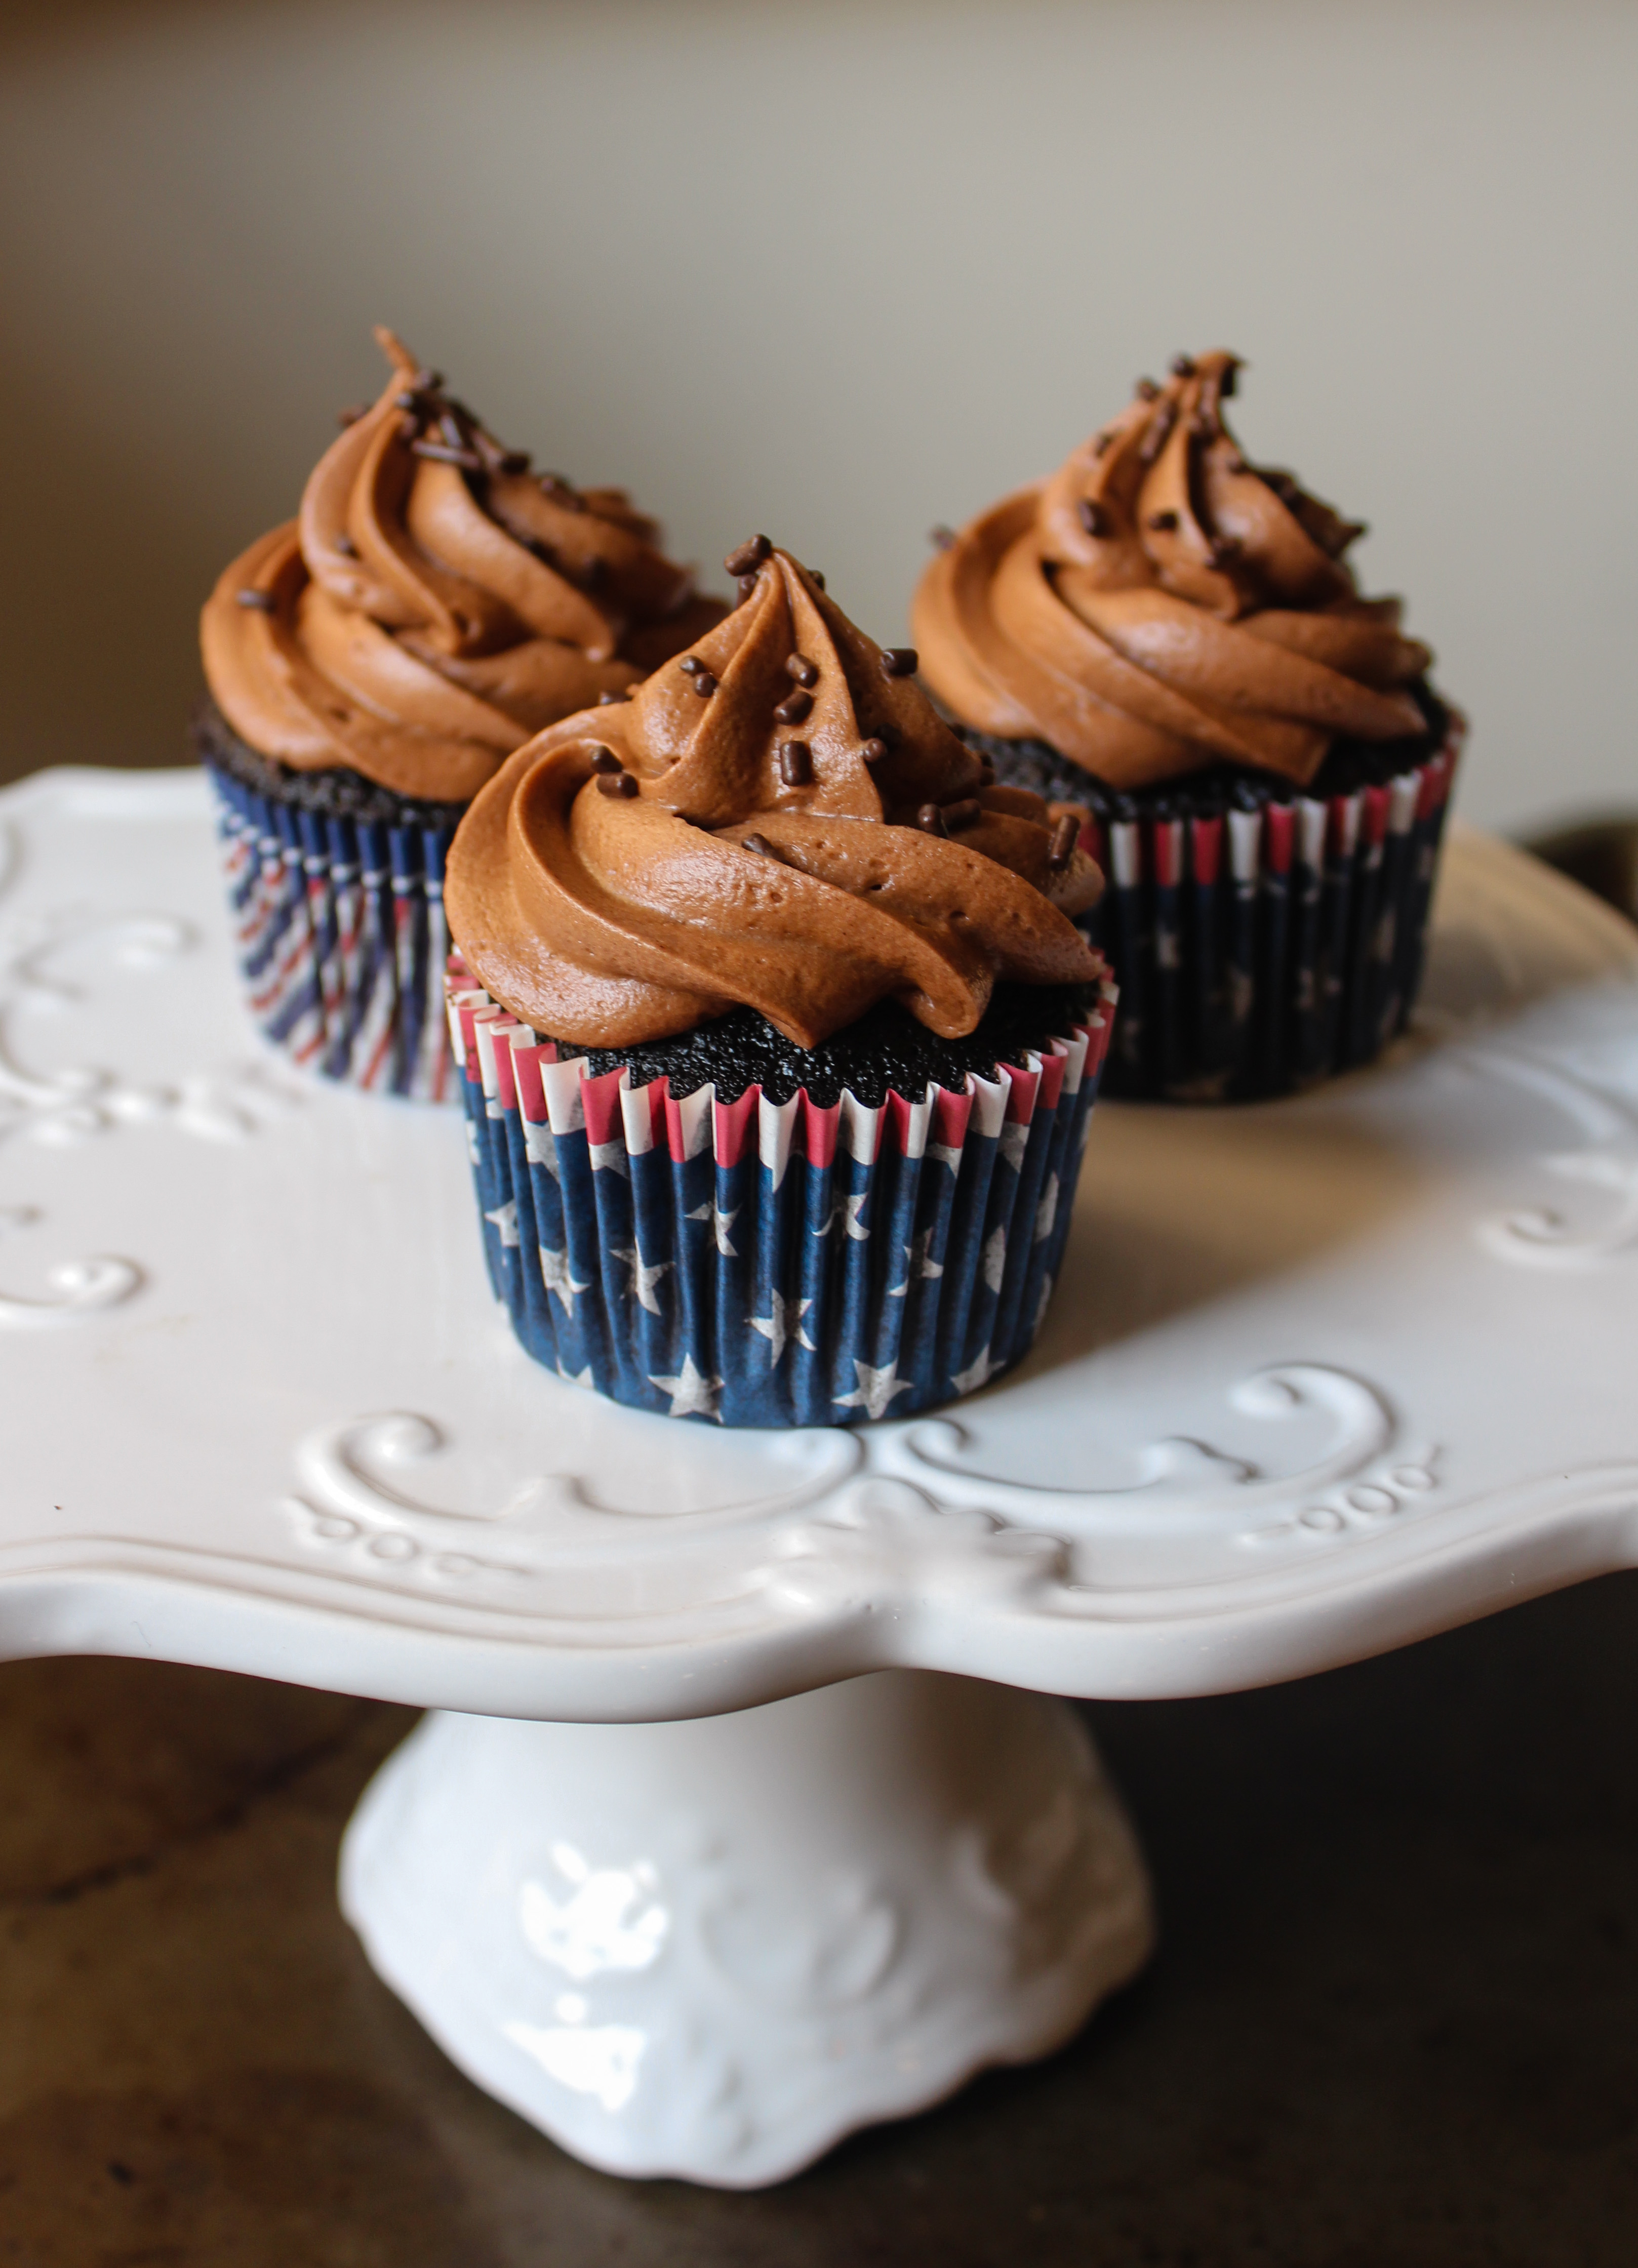 Triple Chocolate Cupcakes - decadent chocolate cupcakes filled with homemade chocolate ganache and topped with the BEST chocolate frosting!